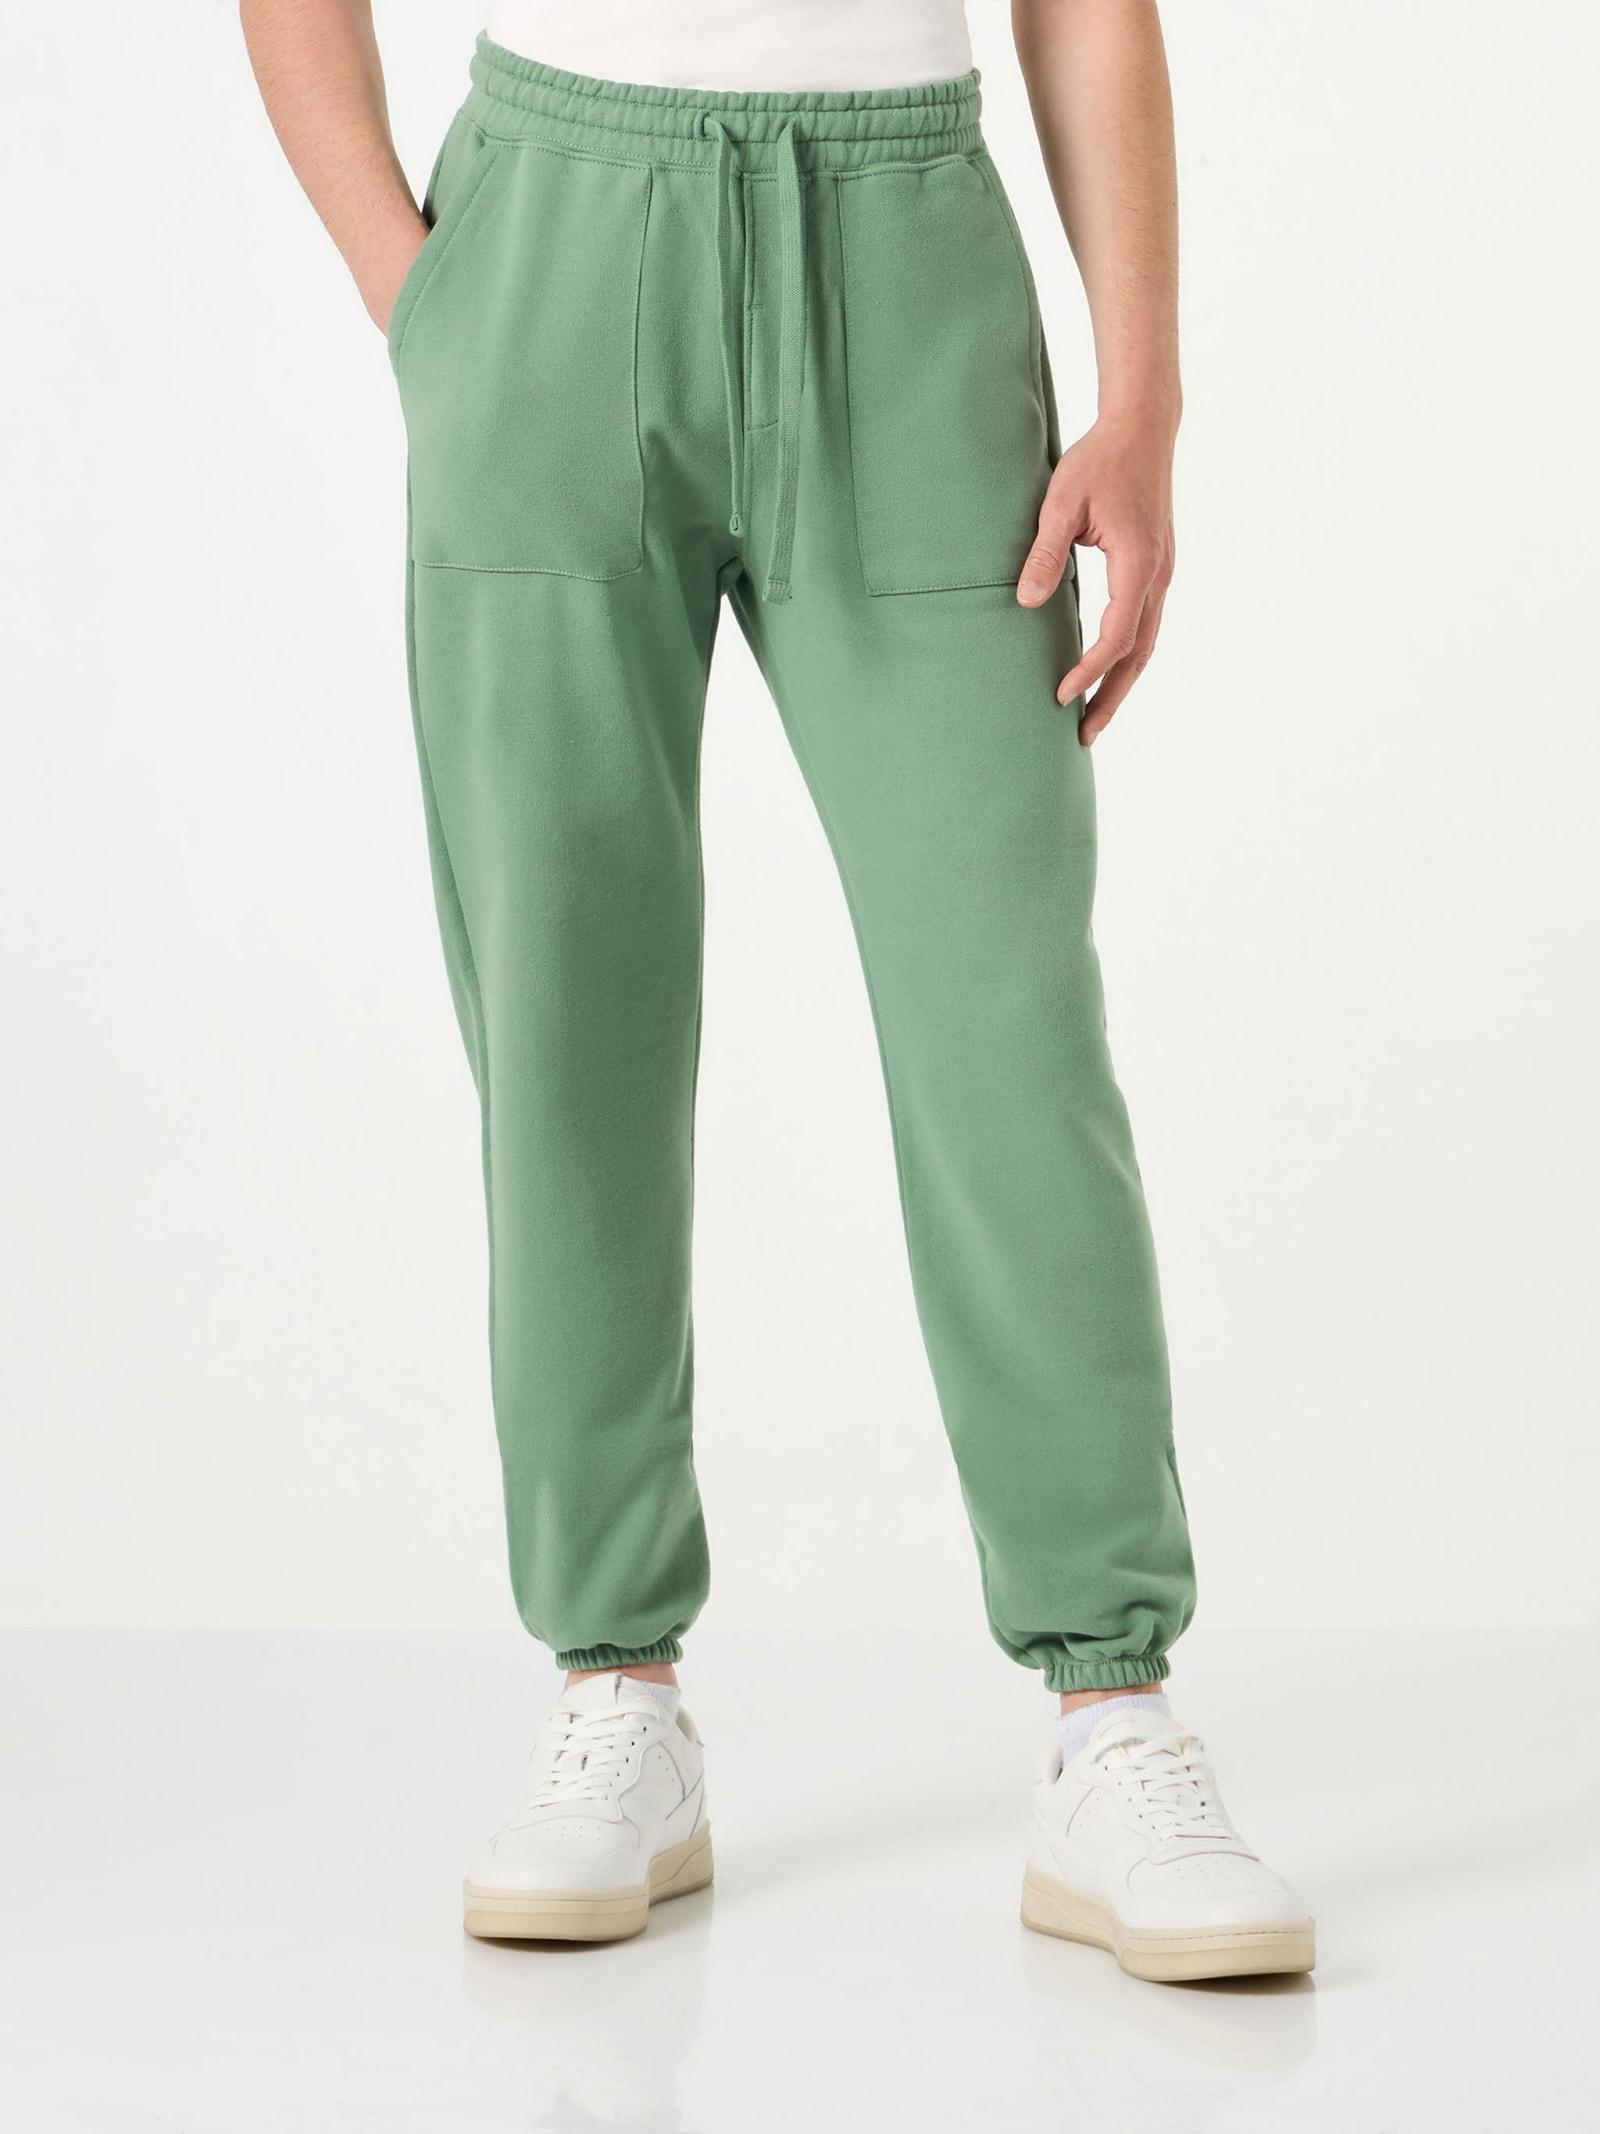 Military Green Track Pants Pantone Special Edition